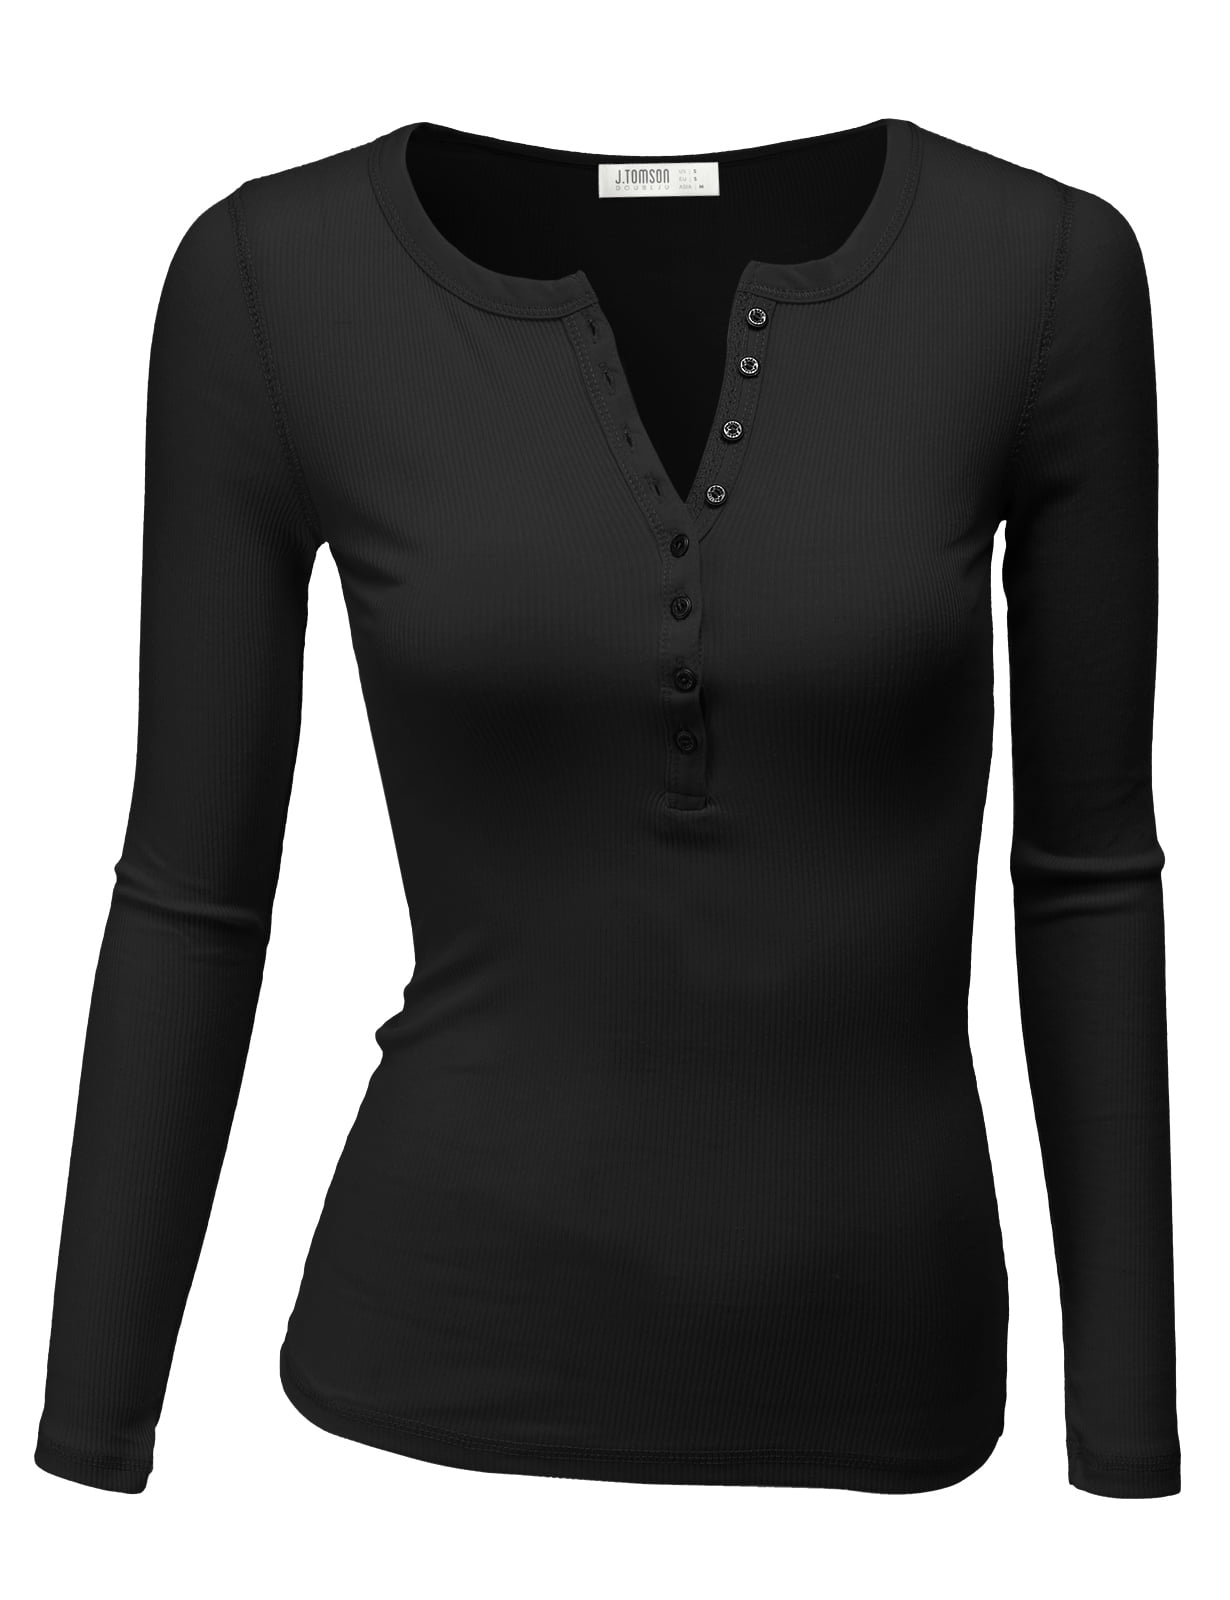 Women's Women Long Sleeve Round Neck Plus Size Henley T-Shirts Thermal Top  CHARCOAL L